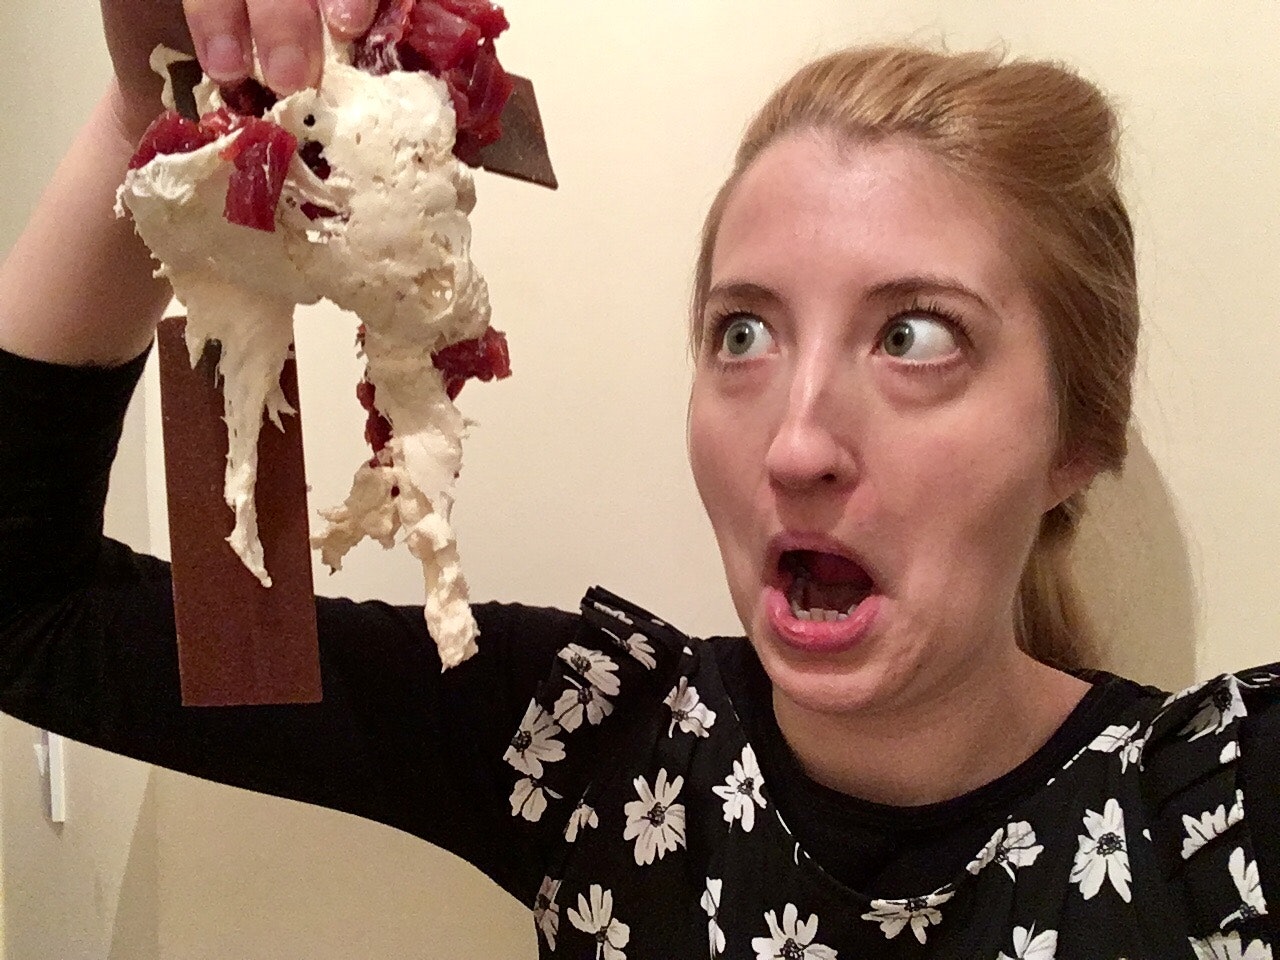 I Tried To Make Vegan Edible Underwear & It Was A Total Disaster